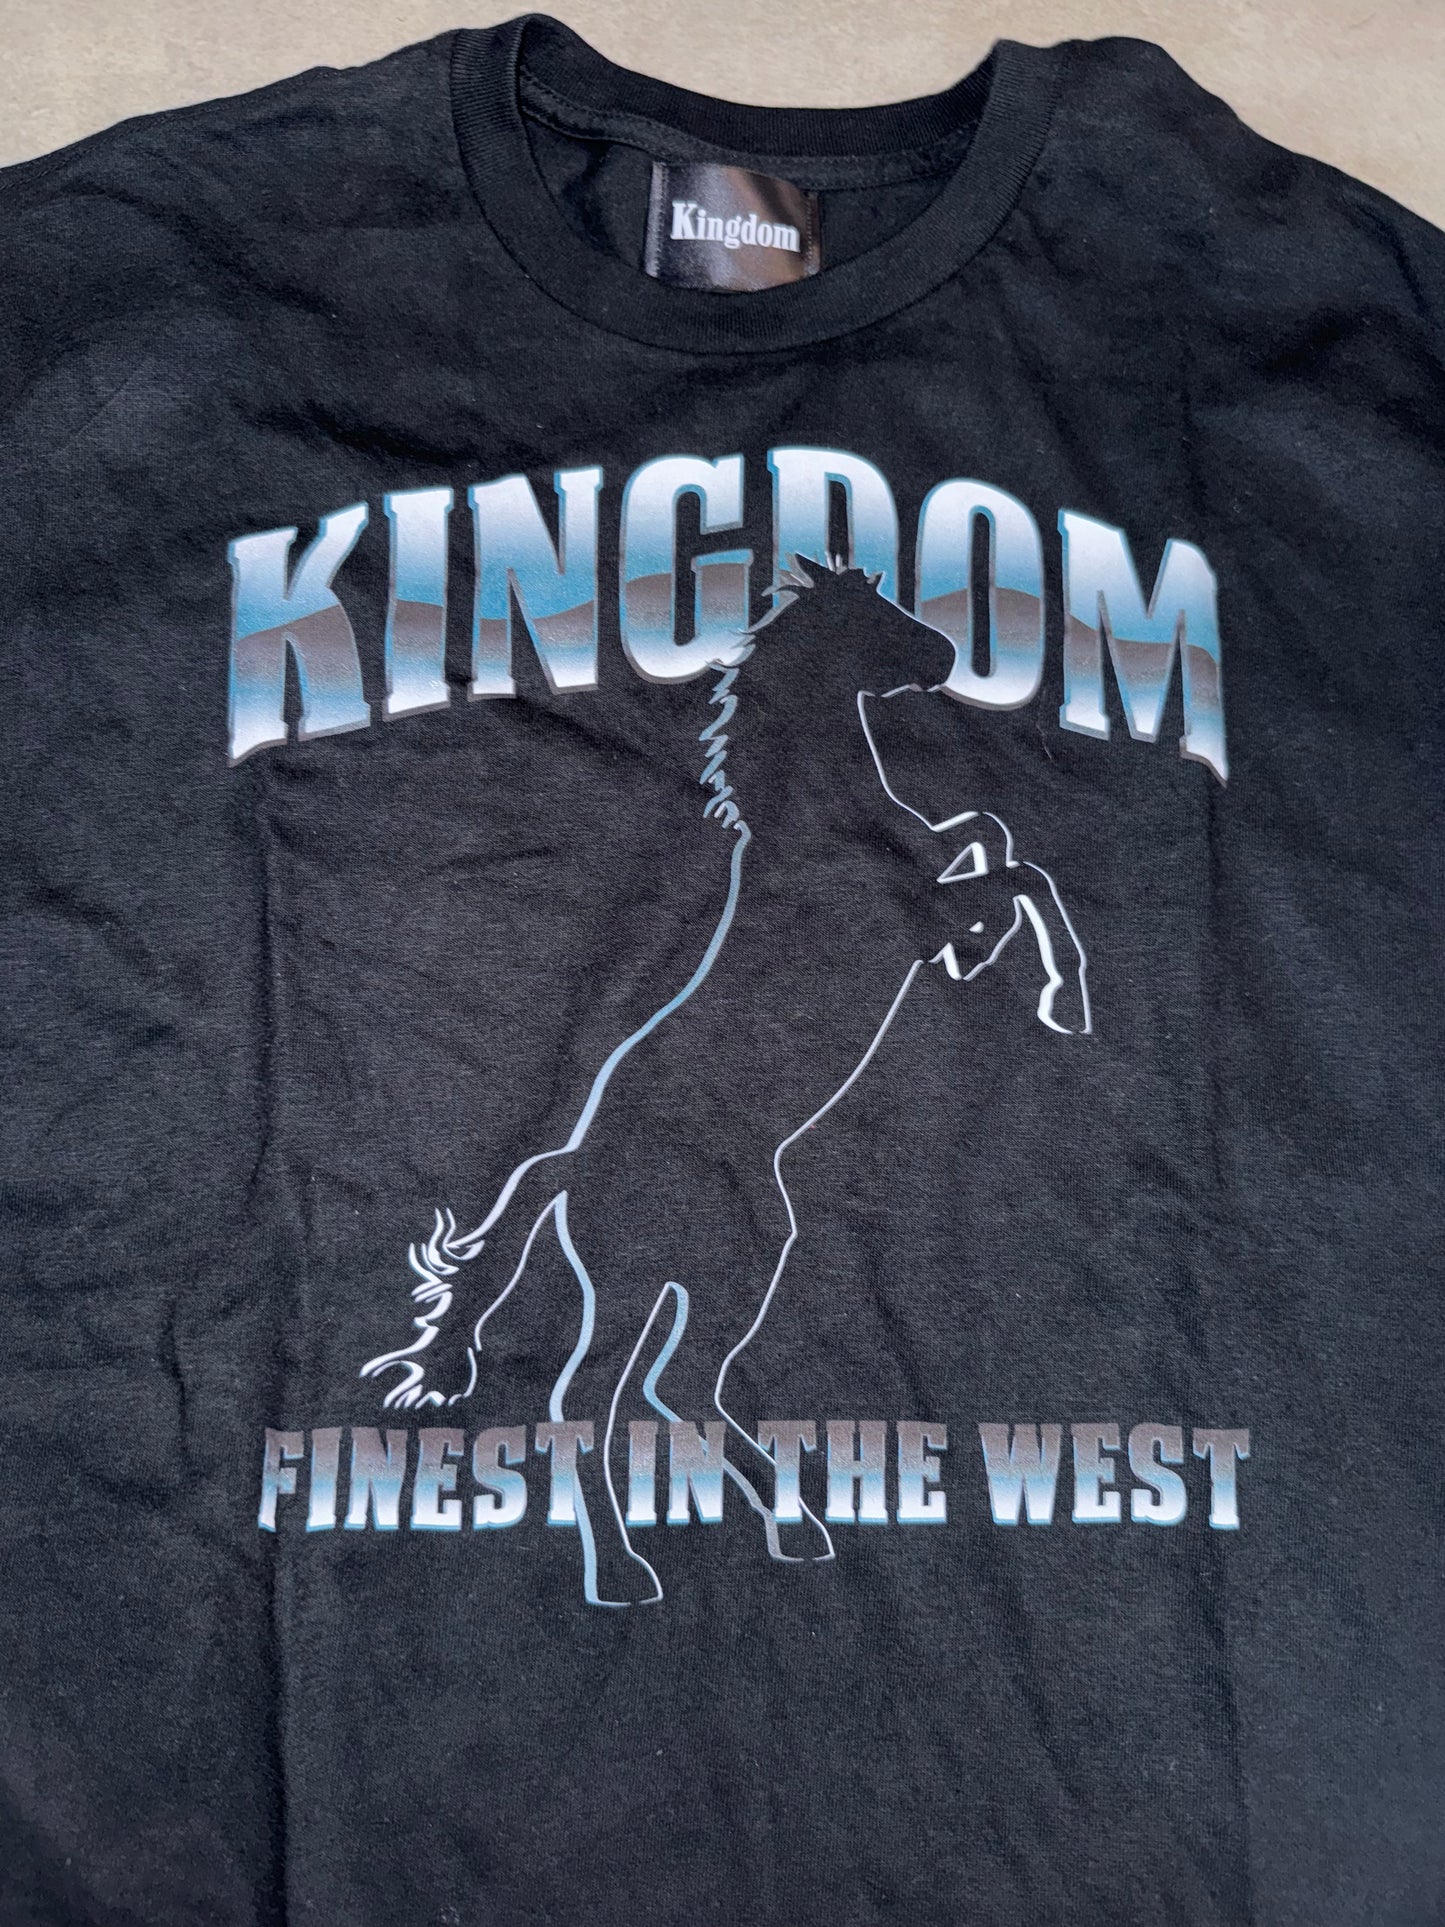 Kingdom tee Finest in the West Black